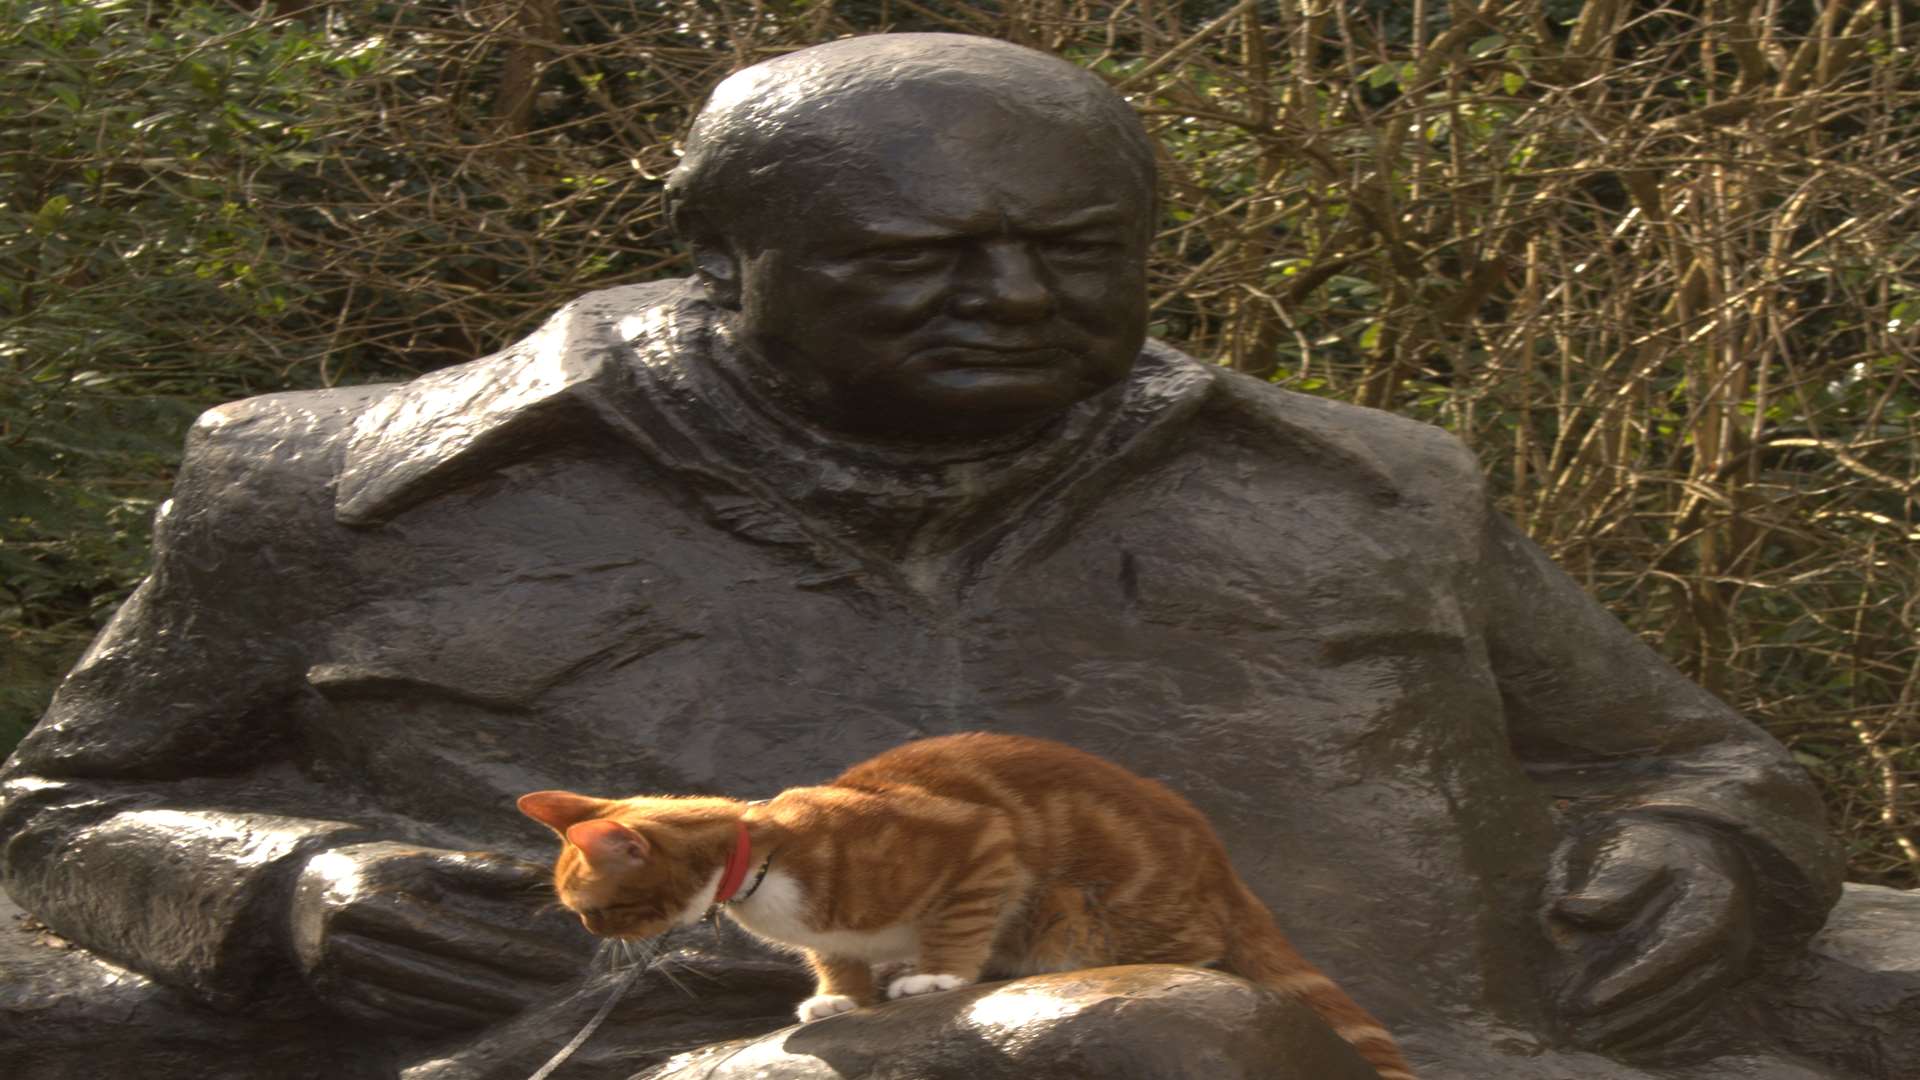 Jock VI on the Churchill Statue at Chartwell. Picture: Iain Carter, National Trust